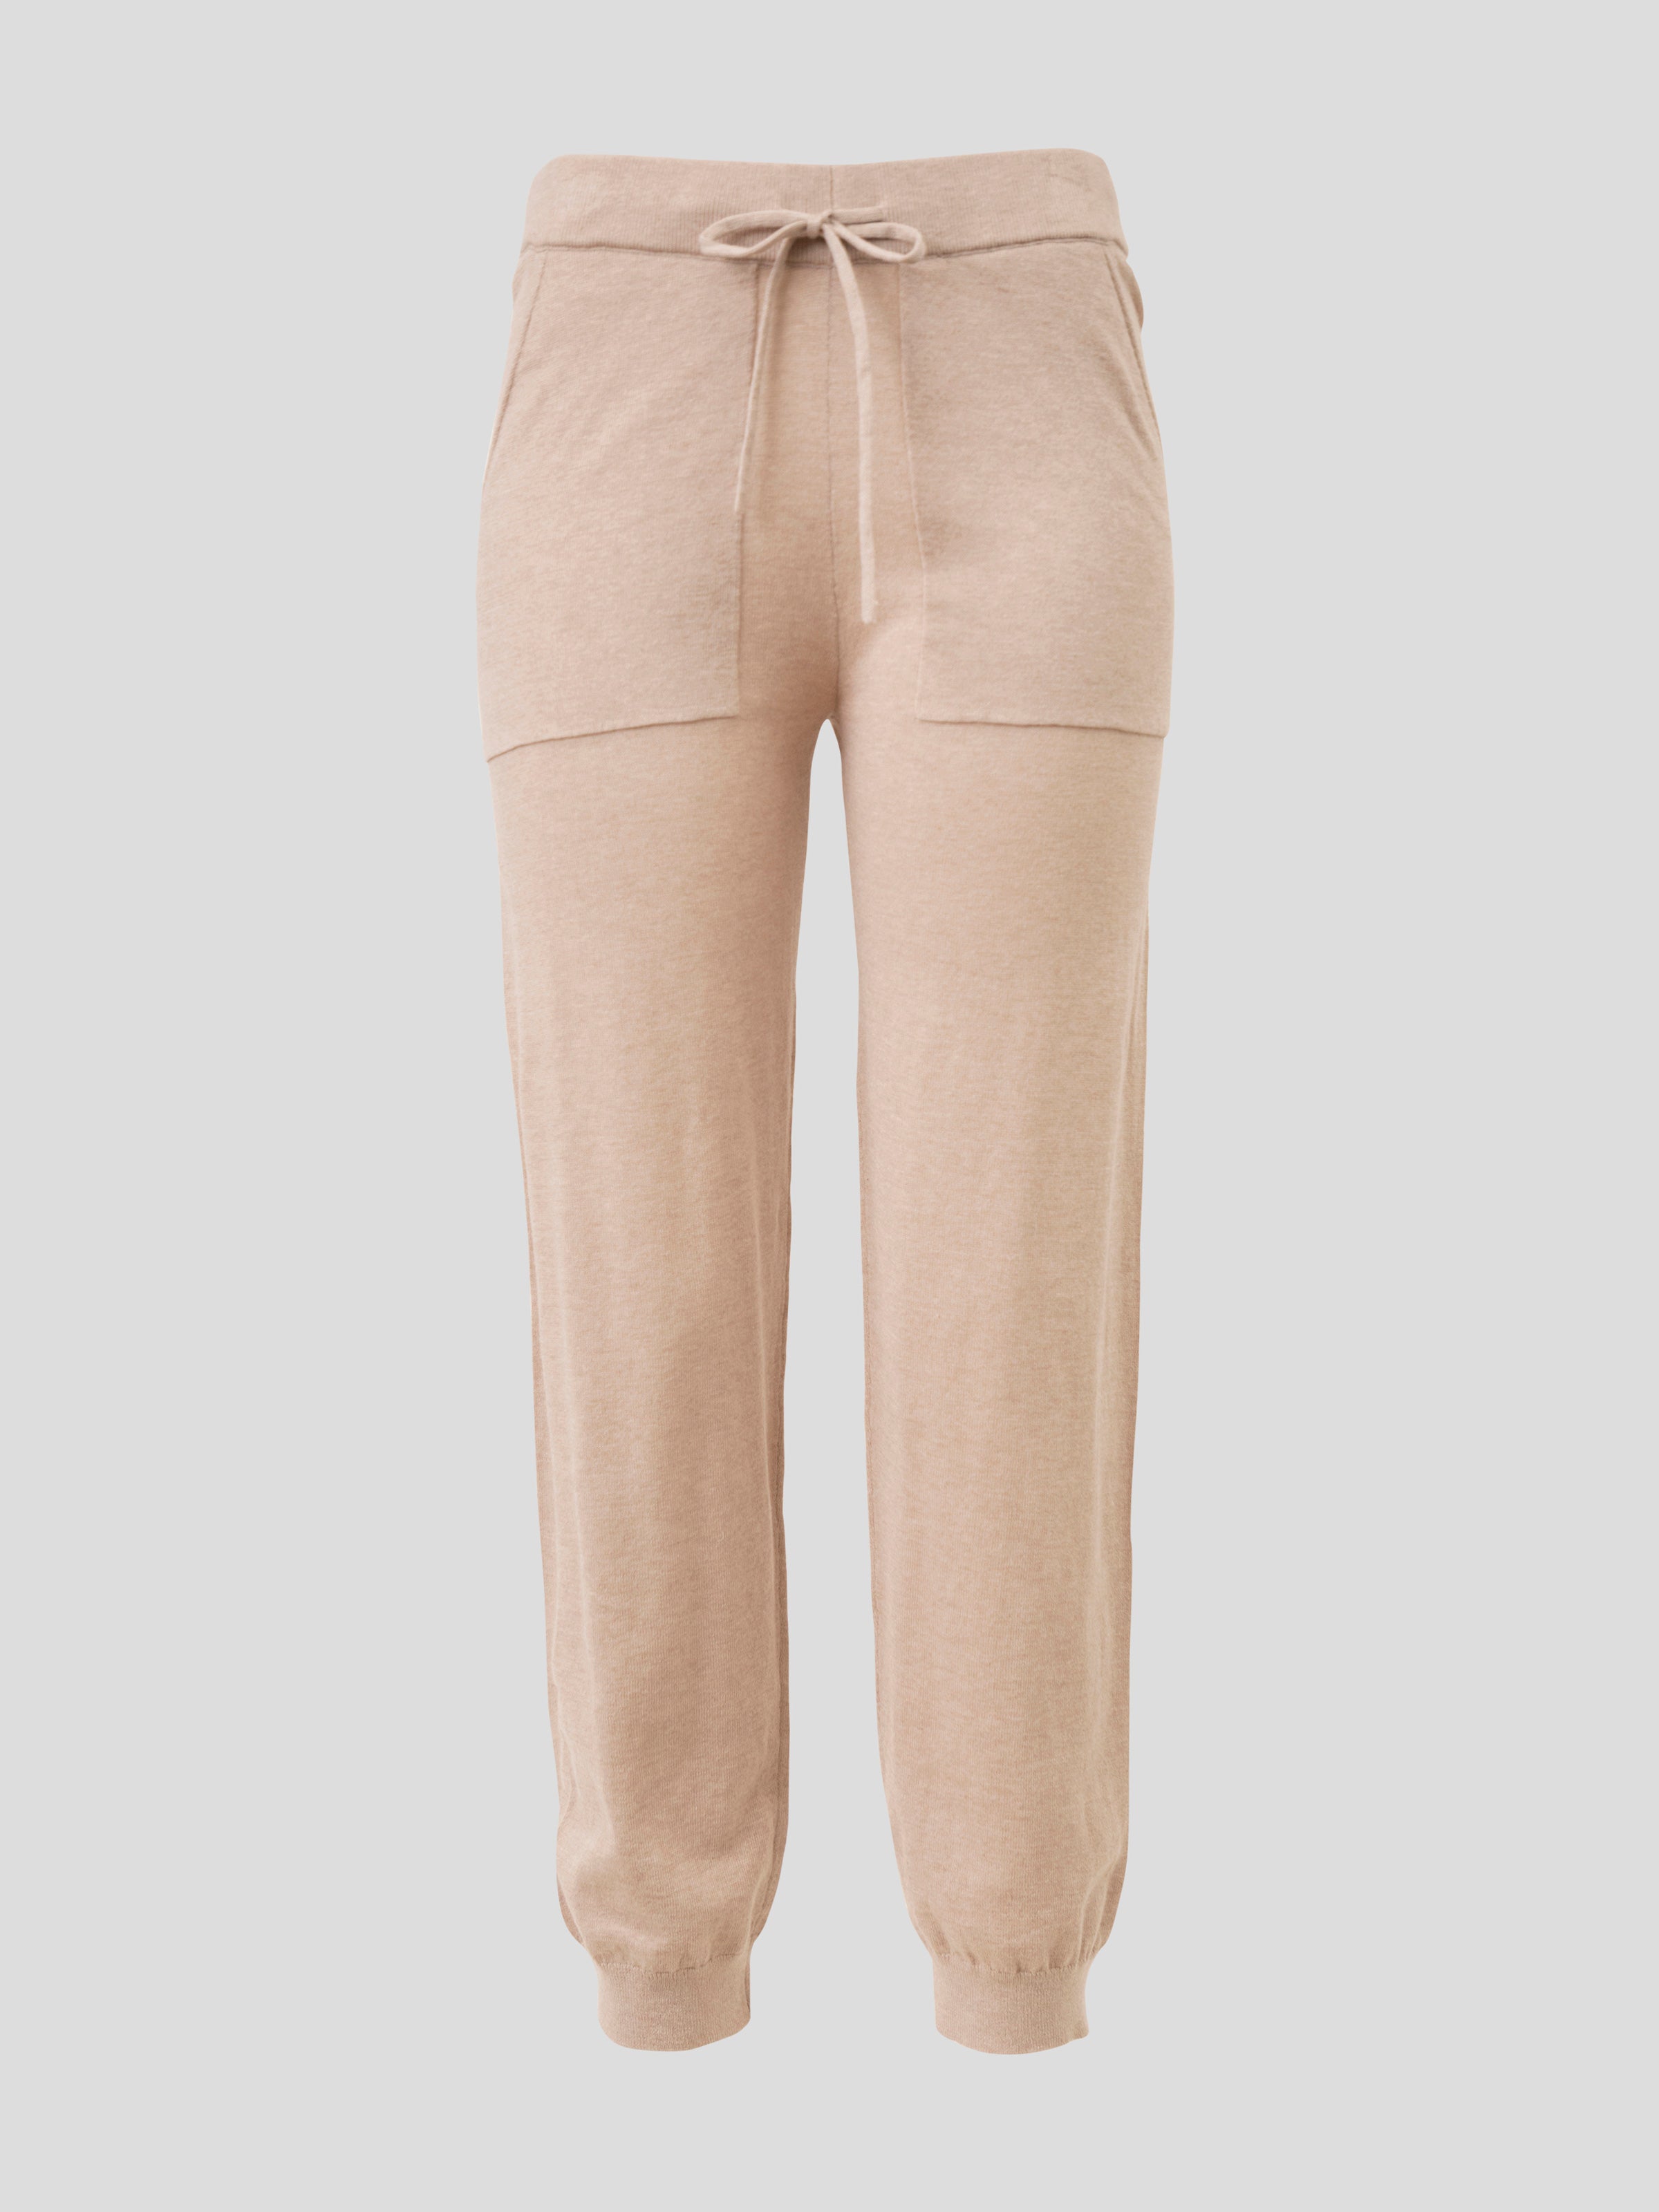 Cashmere Loungewear | Sale Up To 70% Off At THE OUTNET